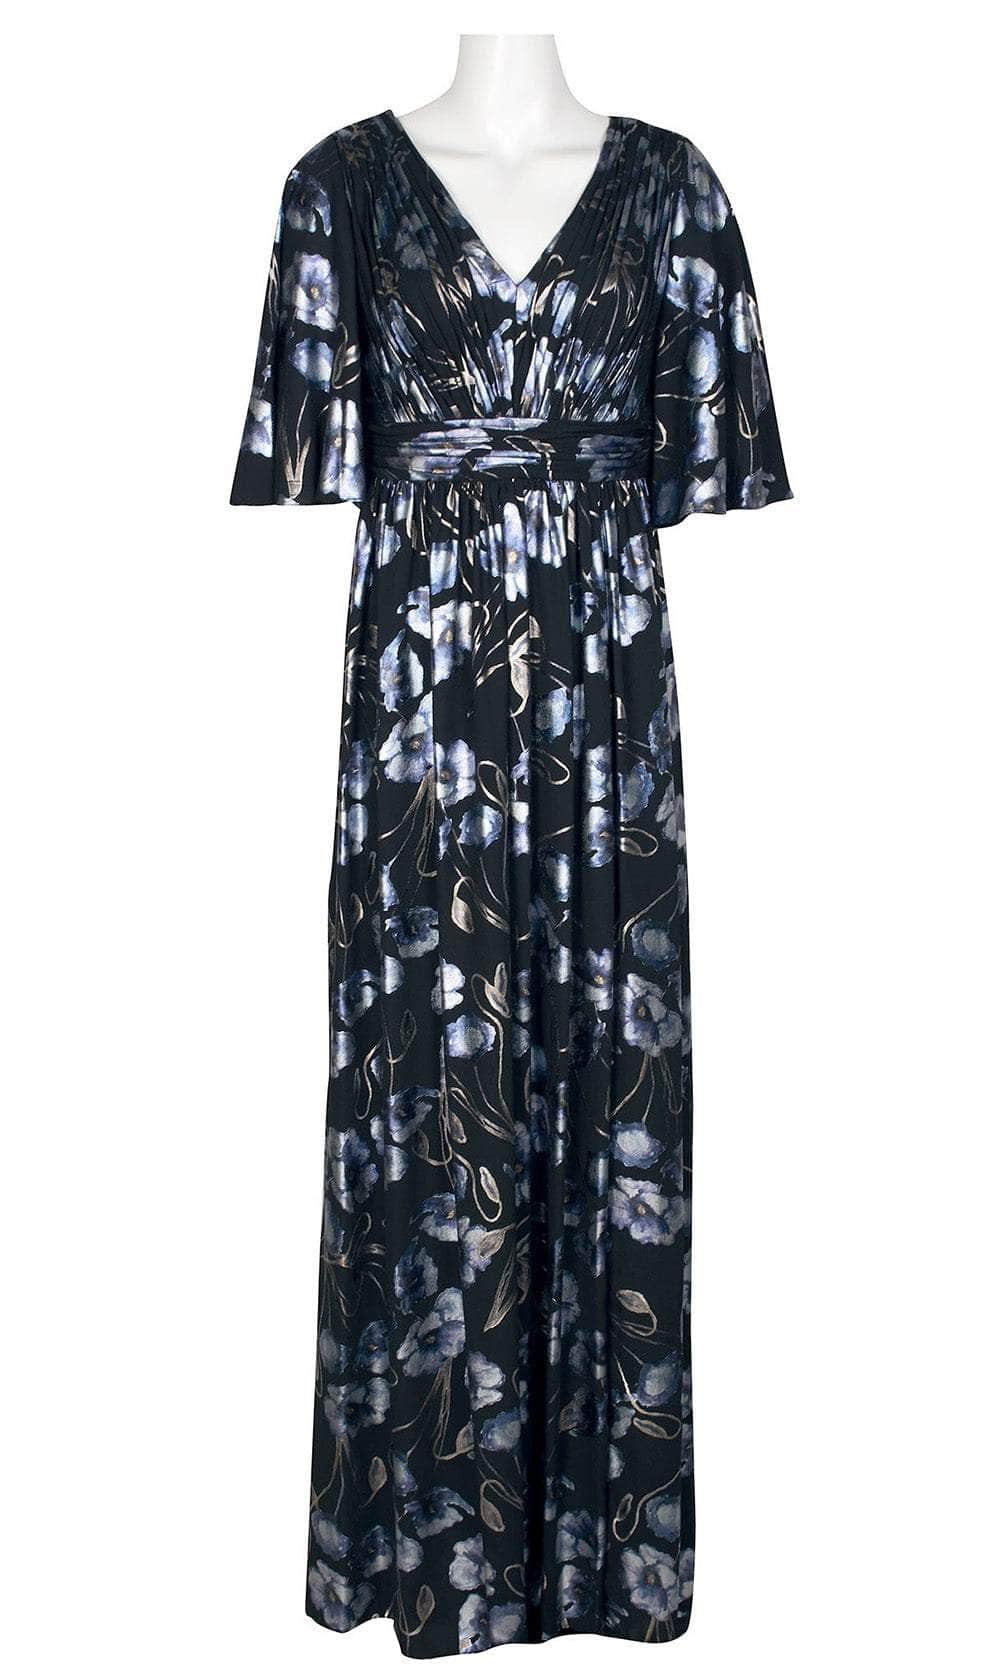 Adrianna Papell AP1E208812 - Metallic Floral Print Dress Special Occasion Dress